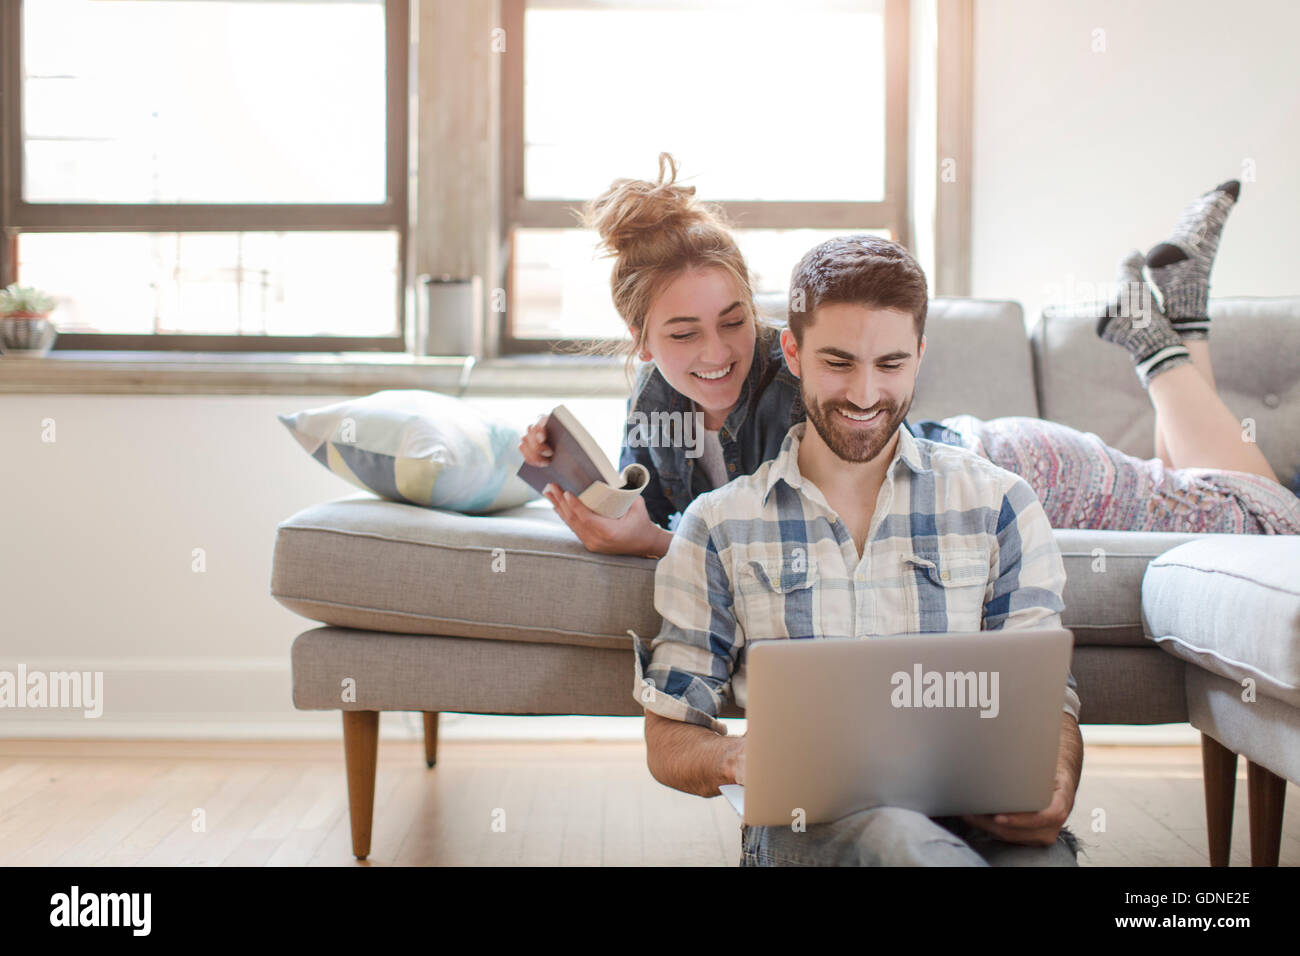 Young couple relaxing at home, looking at laptop Banque D'Images